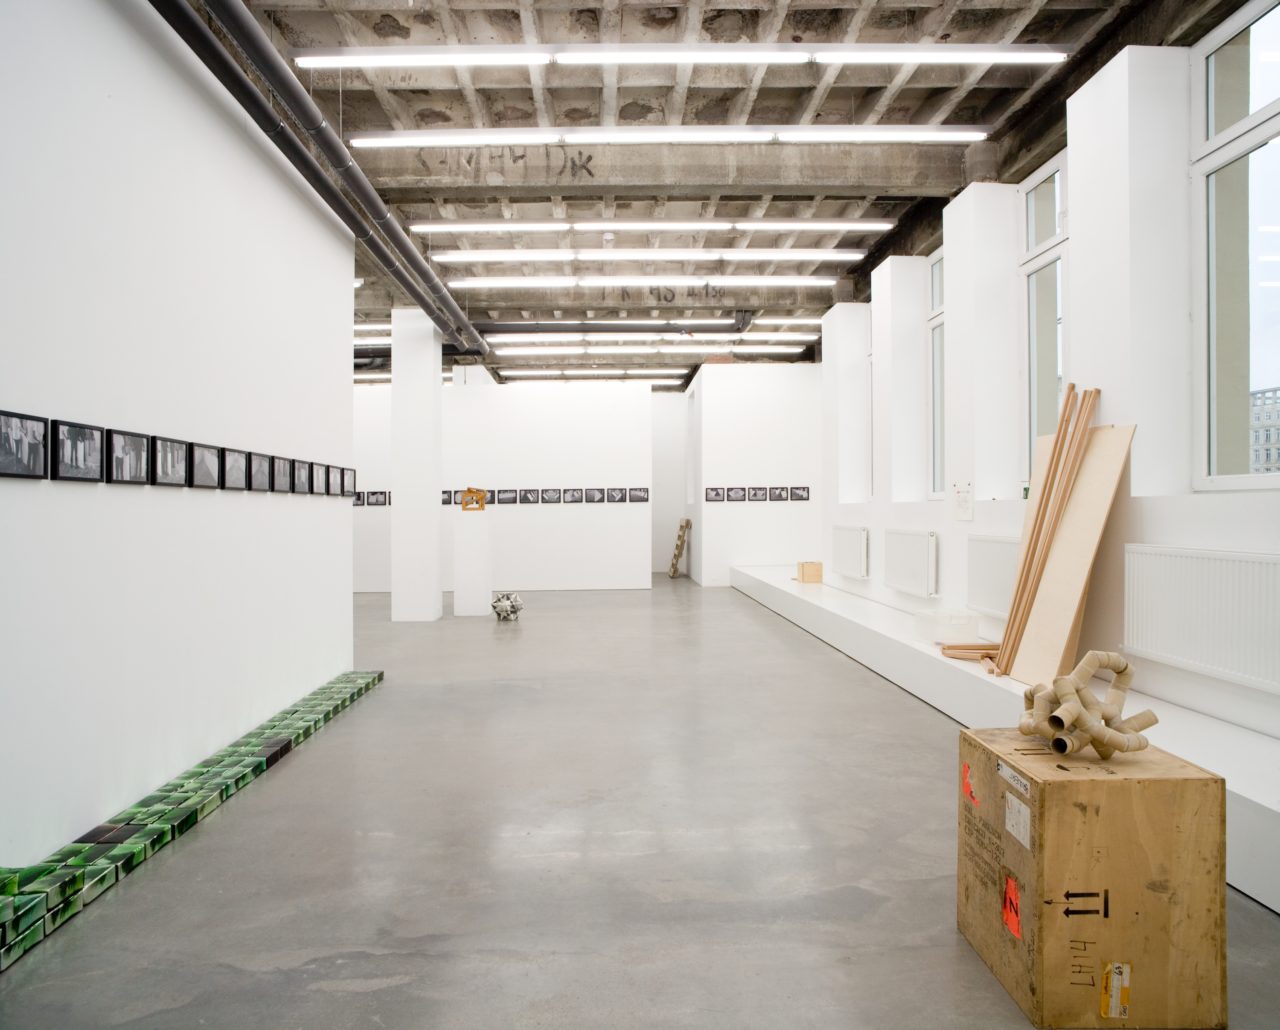 It's about sculpture, Installation view